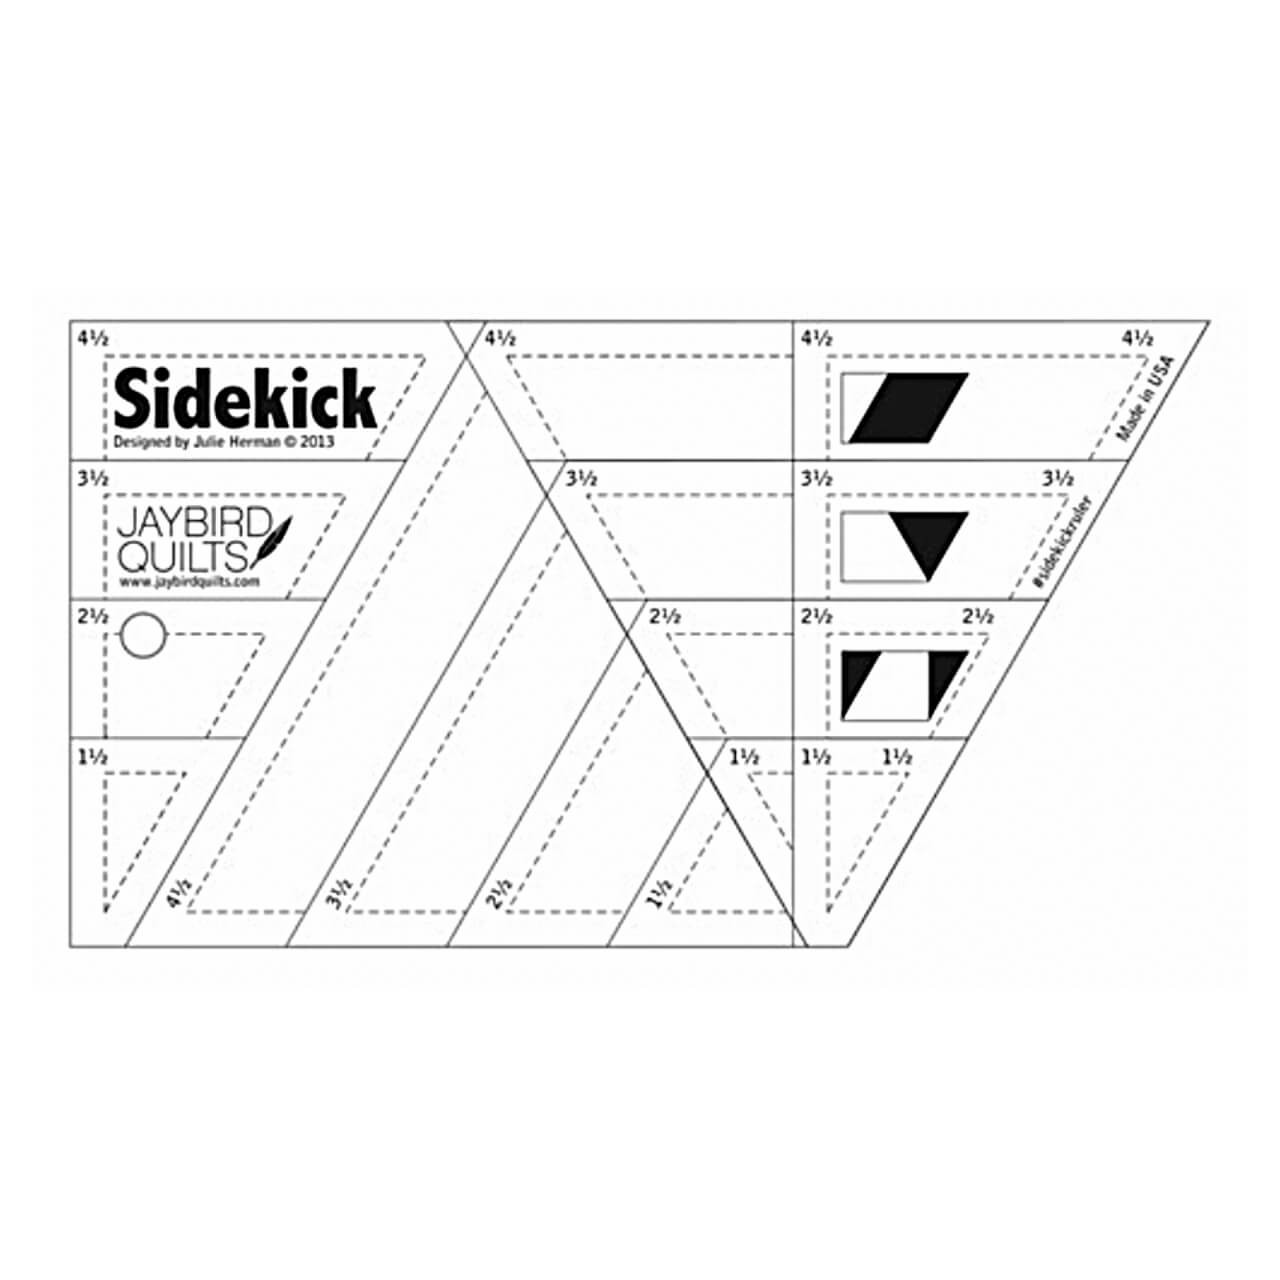 Image of the sidekick ruler without packaging